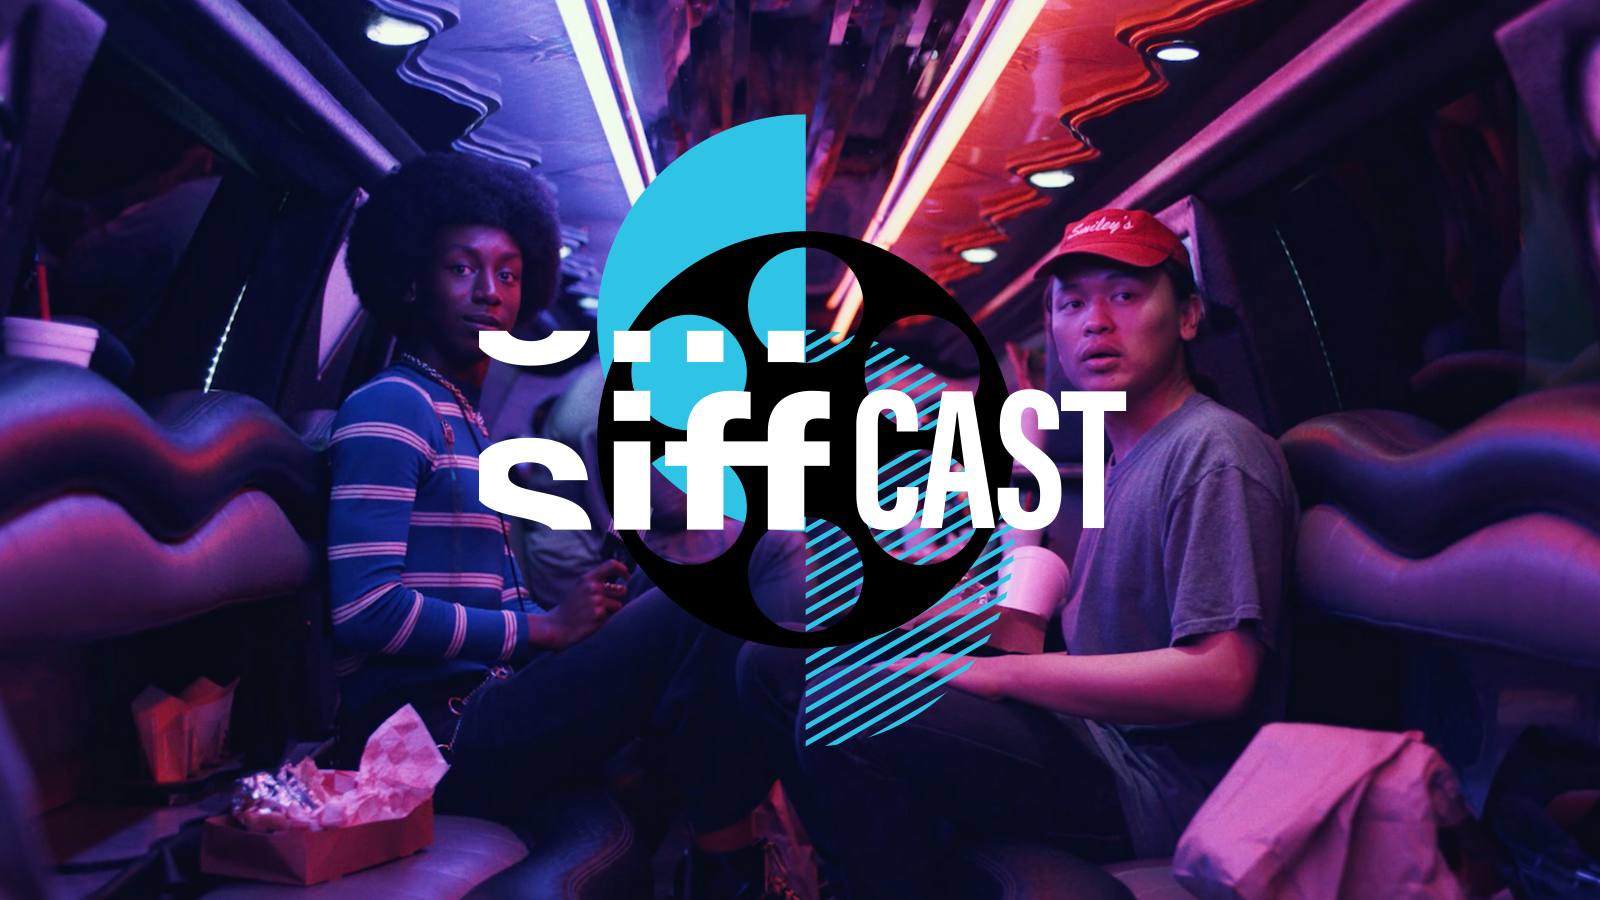 SIFFcast Summertime